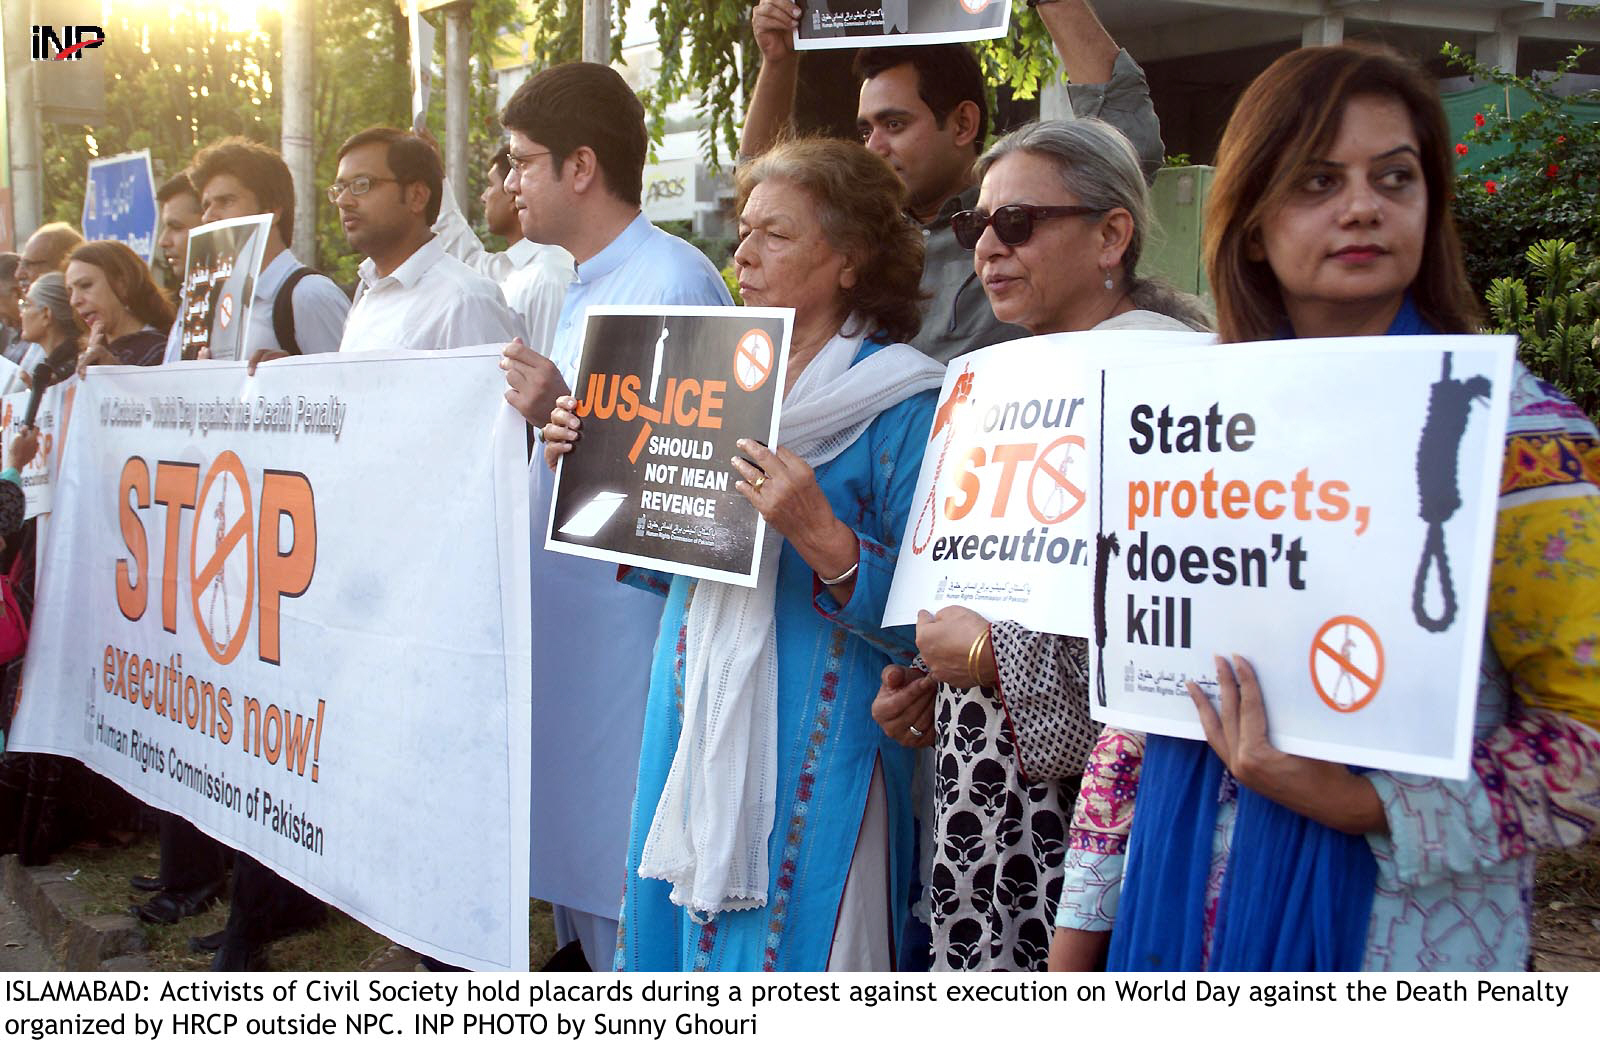 activists of civil society hold placards during a protest against a execution on world day against the death penalty organized by hrcp outside npc photo inp